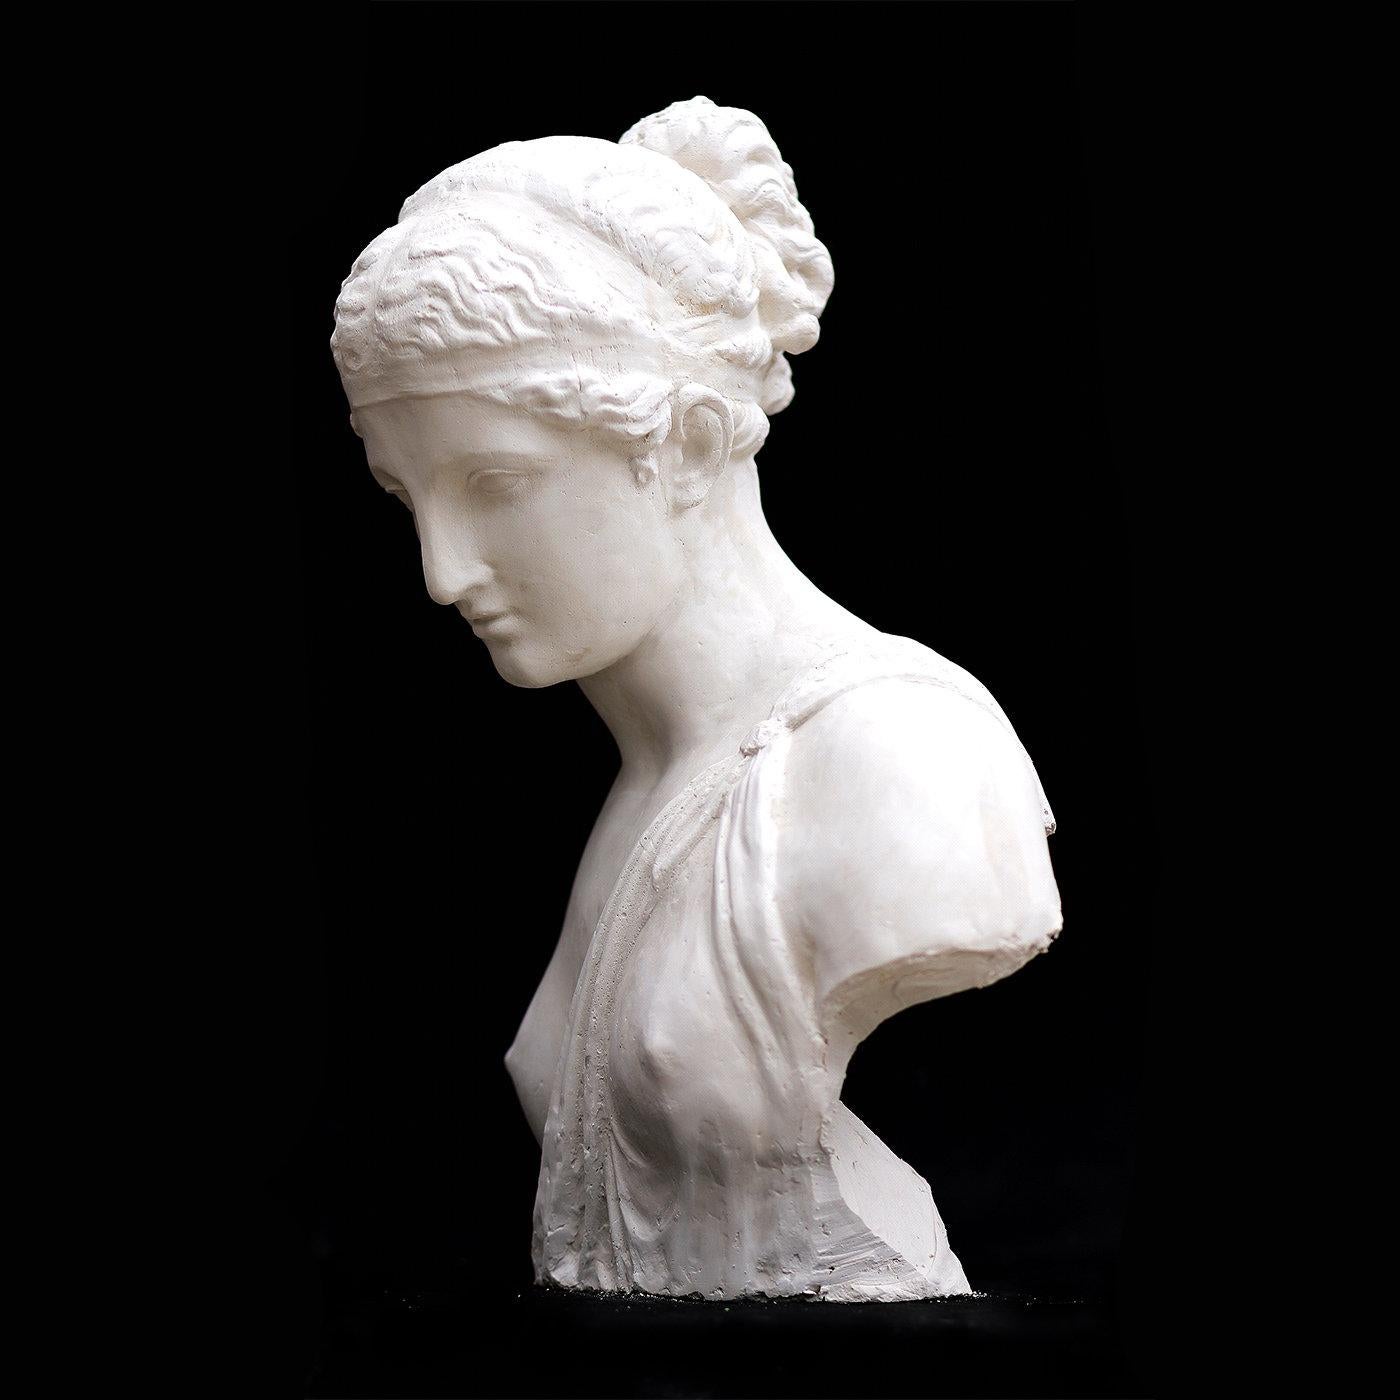 This exceptional piece meticulously reproduces Danish sculptor Bertel Thorvaldsen's oeuvre realized in 1806 and preserved at the Thorvaldsen Museum of Copenaghen. This nude bust of Hebe, the Greek goddess of youth and beauty and daughter of Zeus and